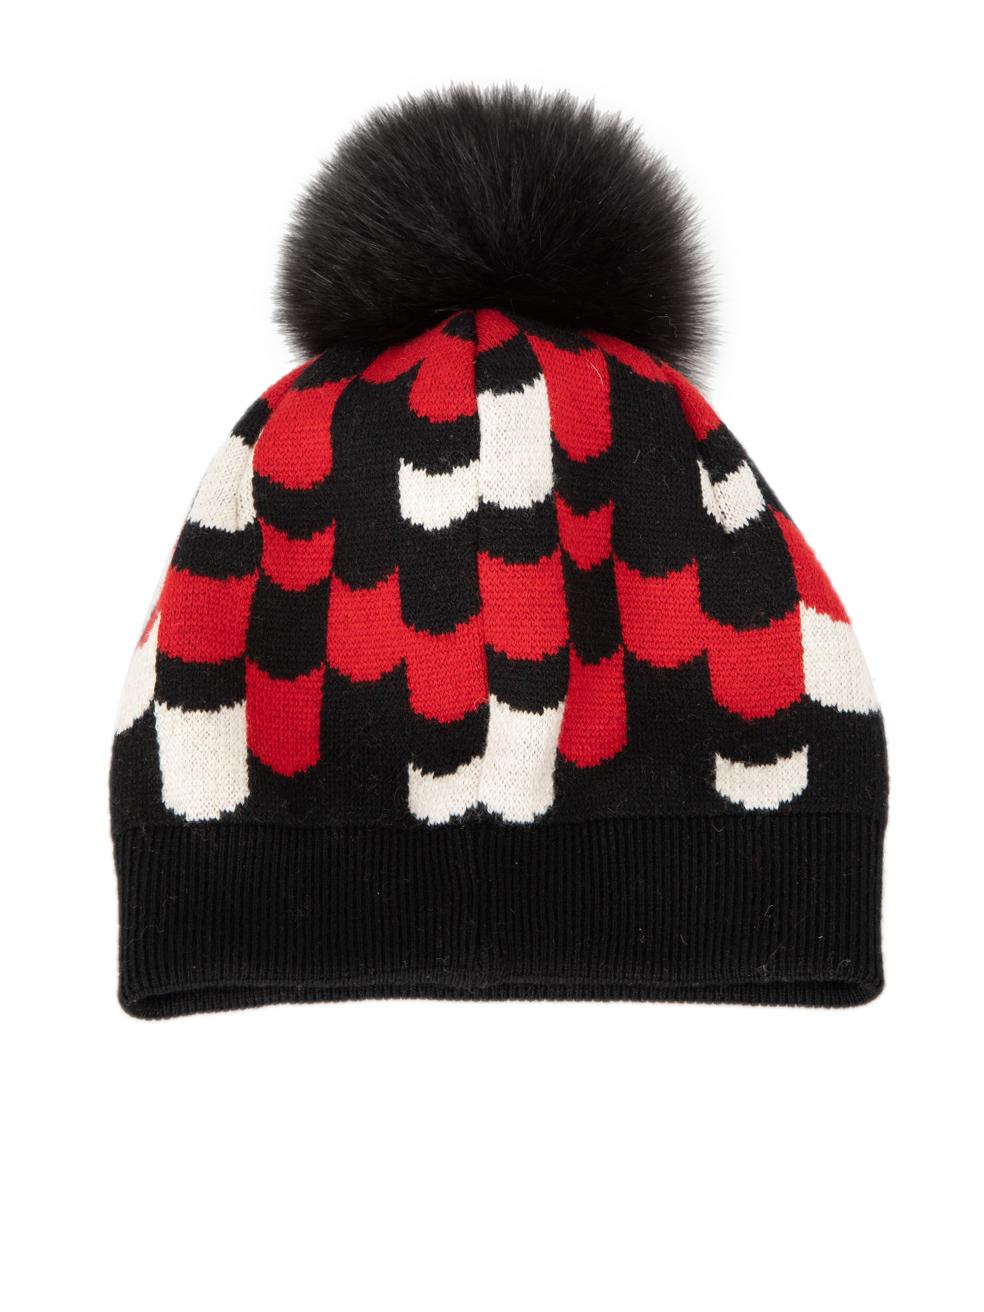 CONDITION is Very good. Hardly any visible wear to hat is evident on this used Prada designer resale item. 



Details


Black and red

Wool

Knit beanie

Geometric pattern

Fox fur pom pom detail





Made in Italy



Composition

100% Fleece